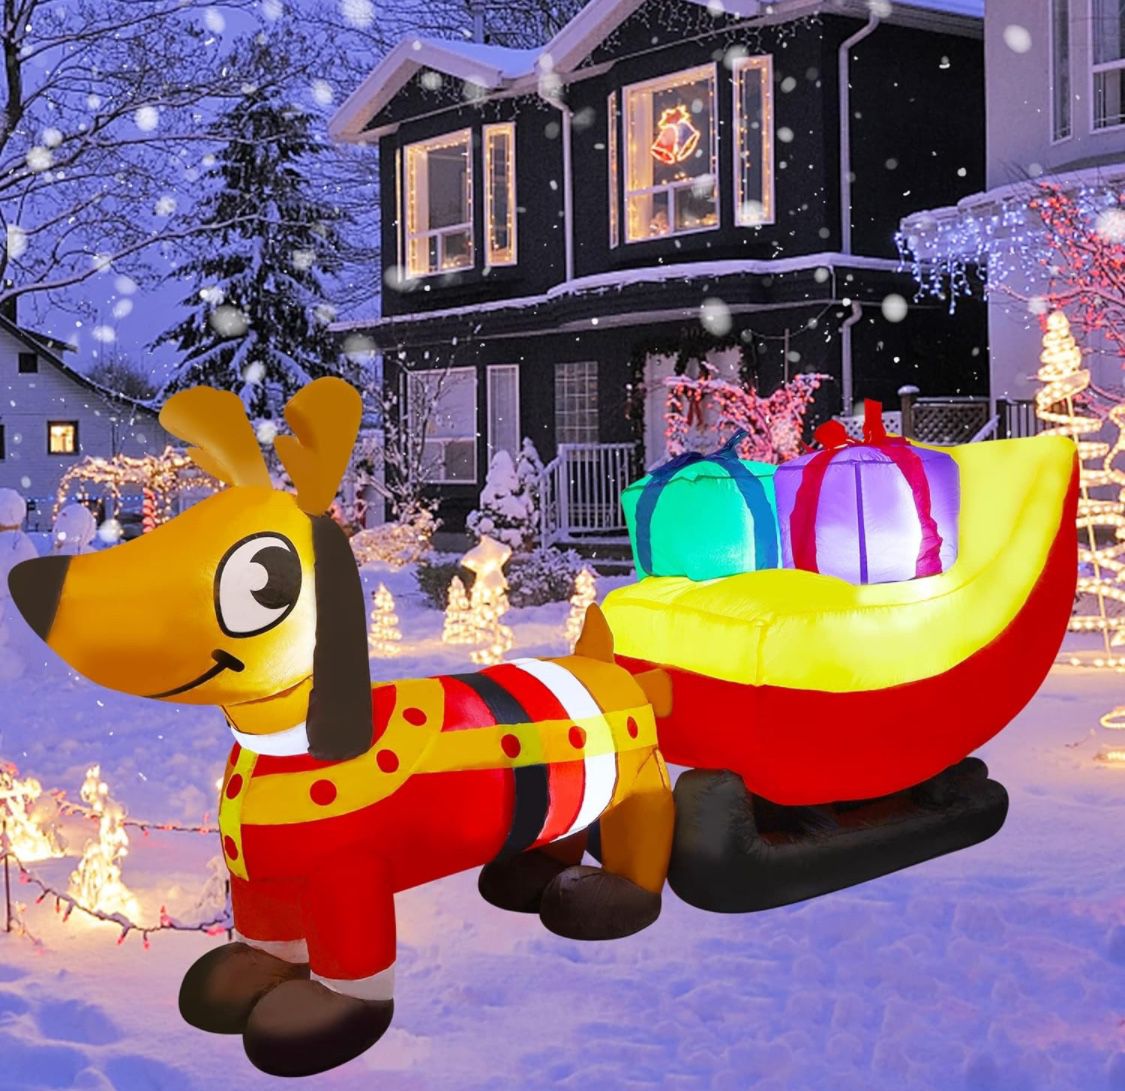 NEW 7’ Tall Light Up Yard Inflatable